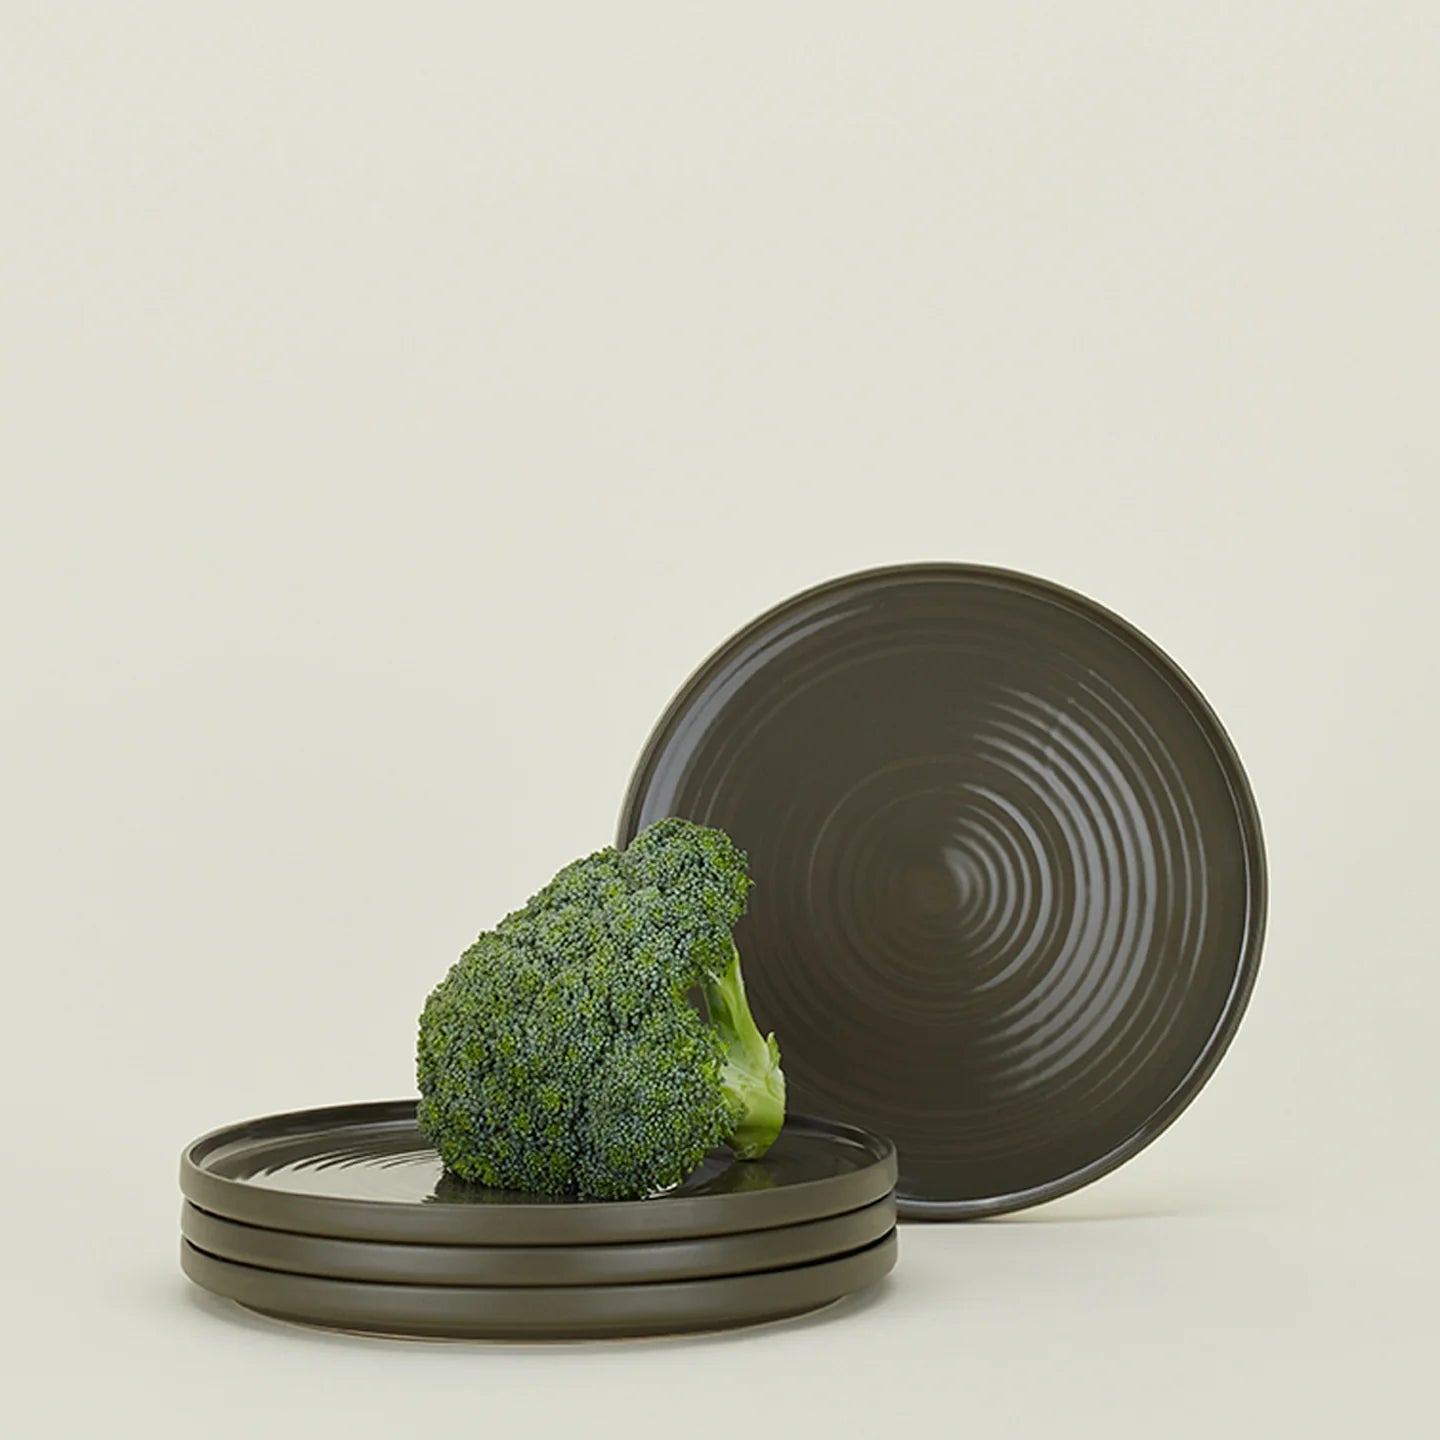 Essential Dinner Plate, Olive